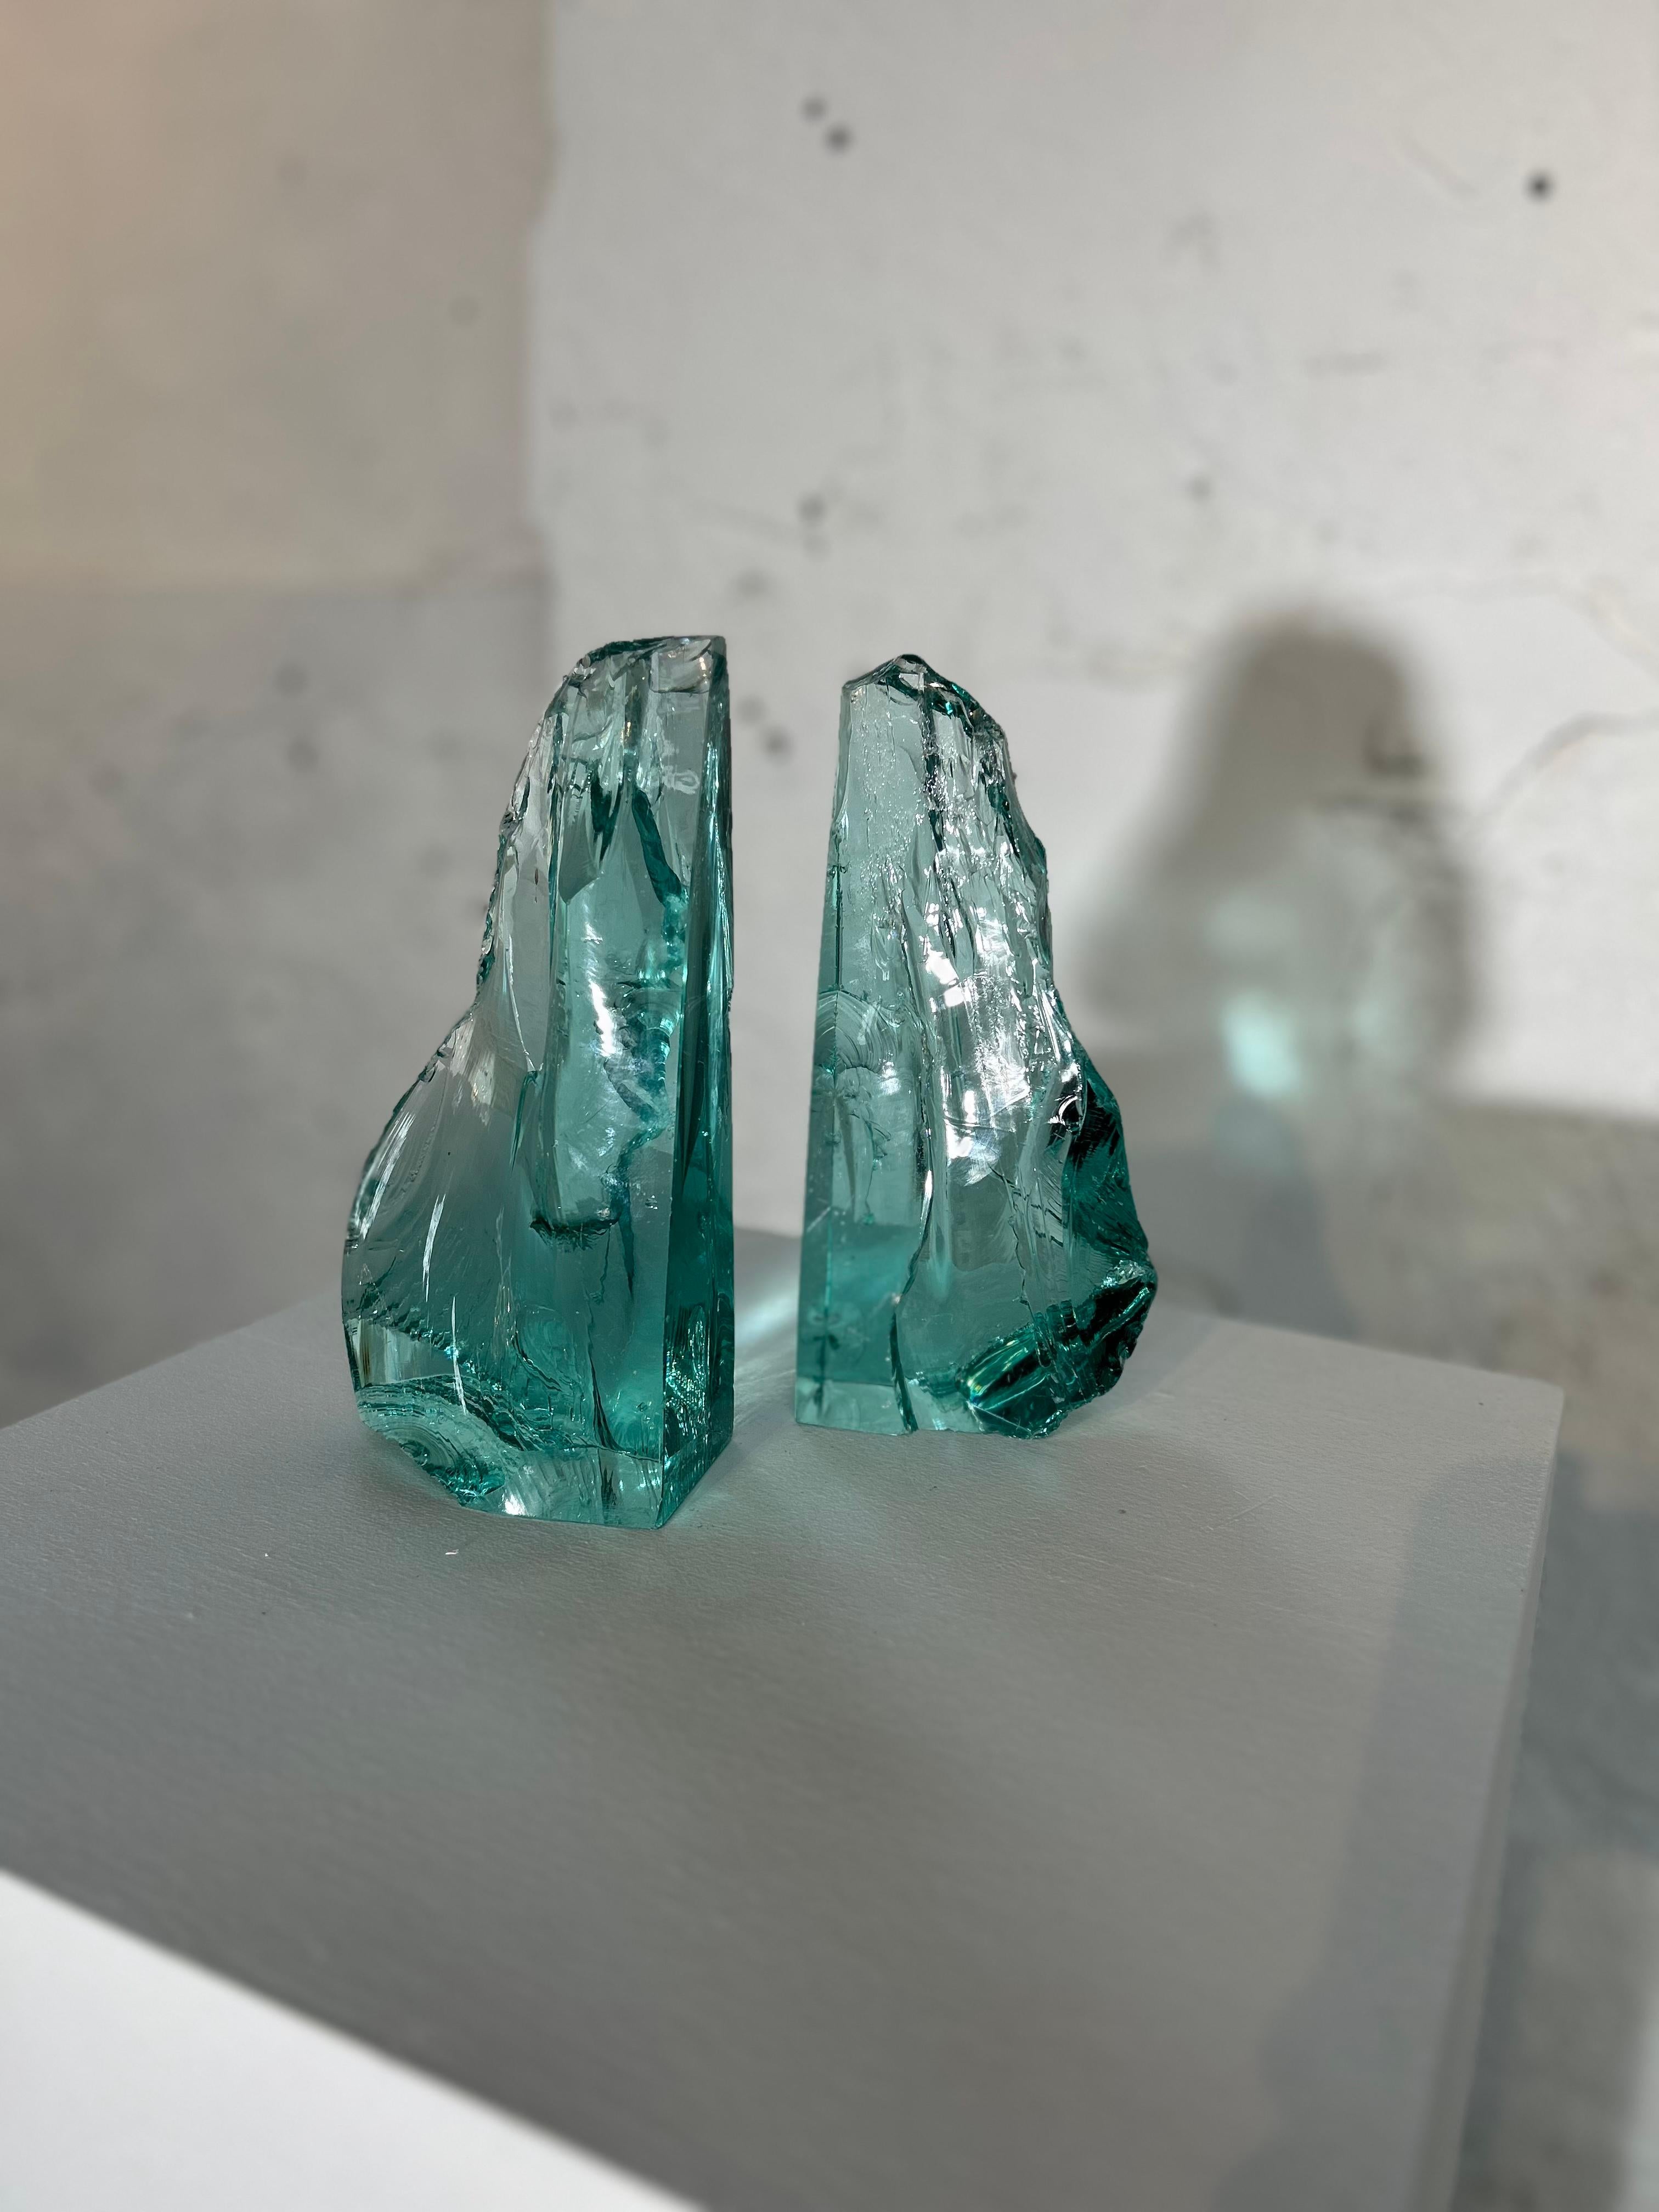 Fontana Arte - Pair Of Glass Bookends
Pair of bookend sculptures by Fontana Arte in thick glass, worked with pliers.
circa 1960
Height 23 cm
Width 12 cm